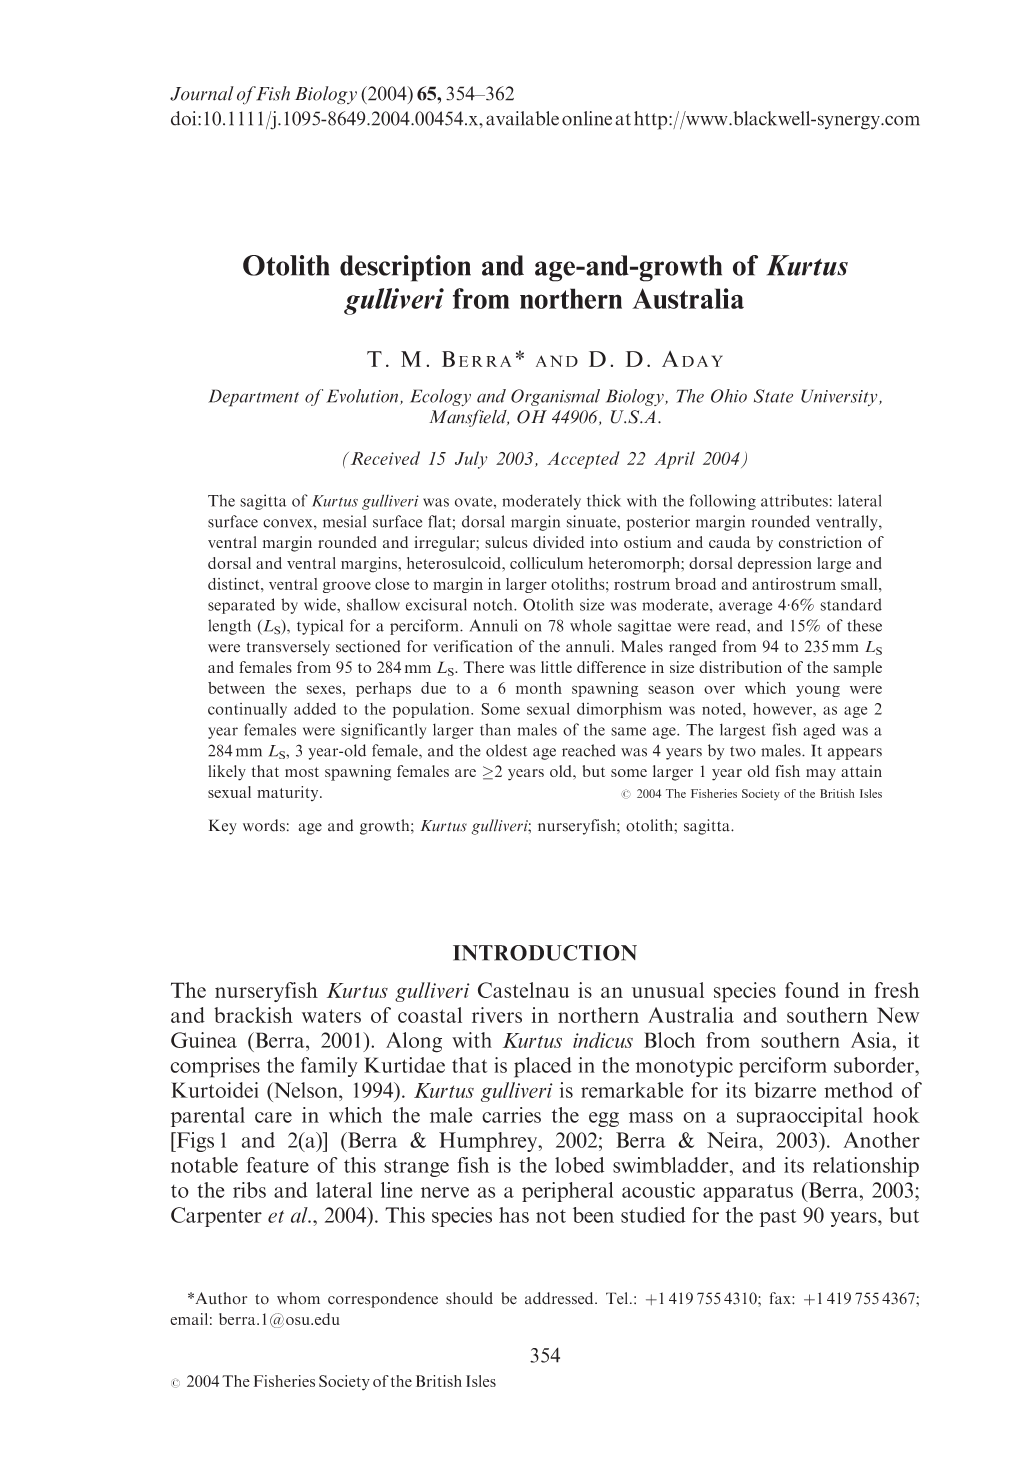 Otolith Description and Age-And-Growth of Kurtus Gulliveri from Northern Australia